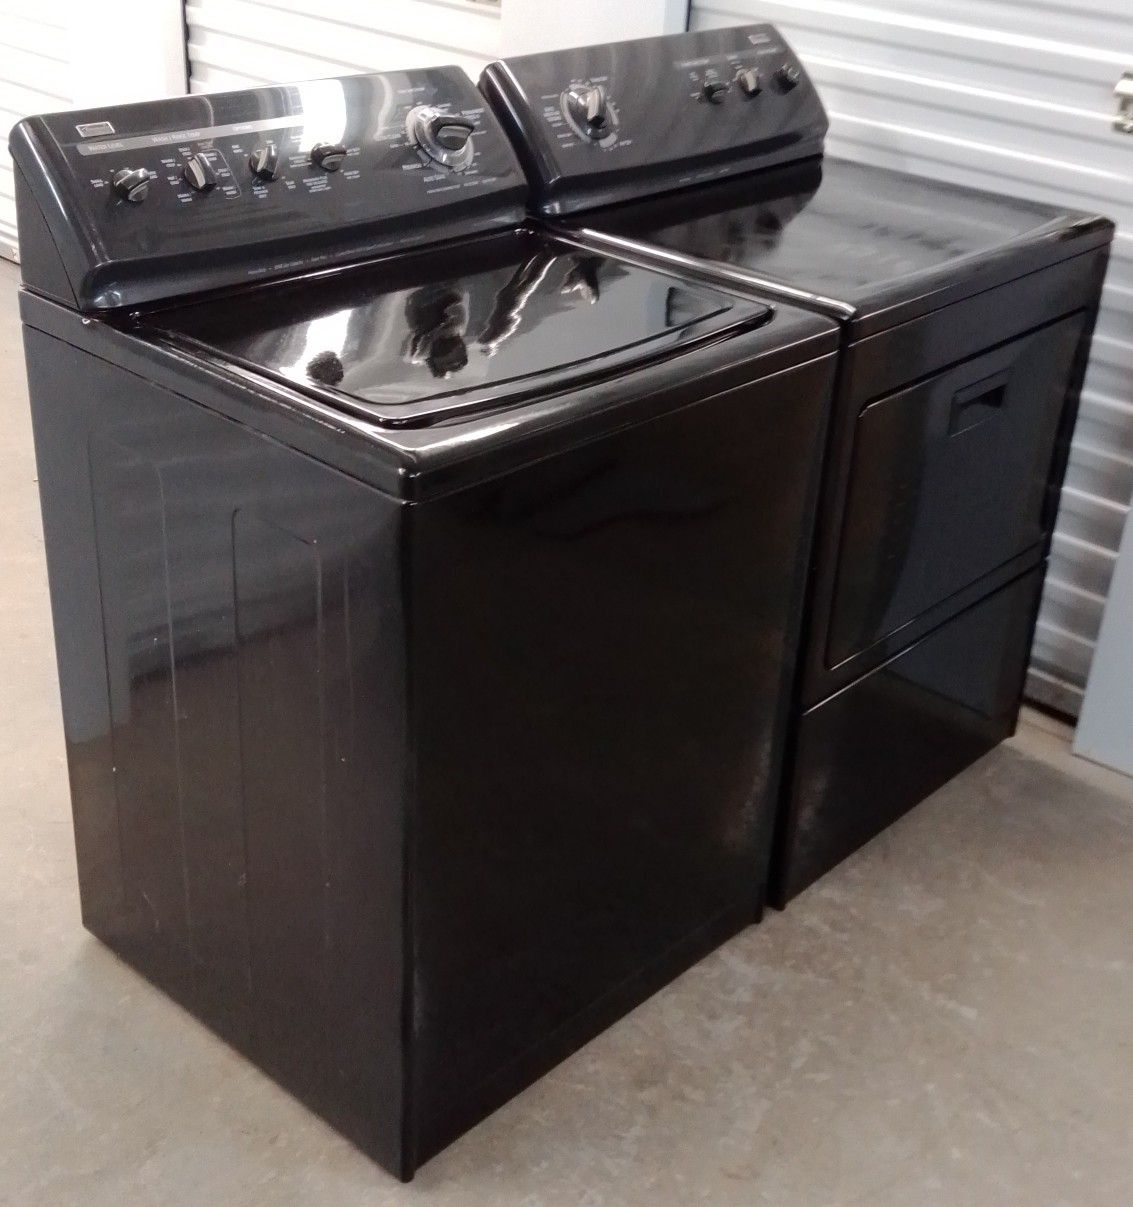 KENMORE ELITE BLACK HEAVY DUTY WASHER AND DRYER ON SALE WITH WARRANTY AND DELIVERY AVAILABLE